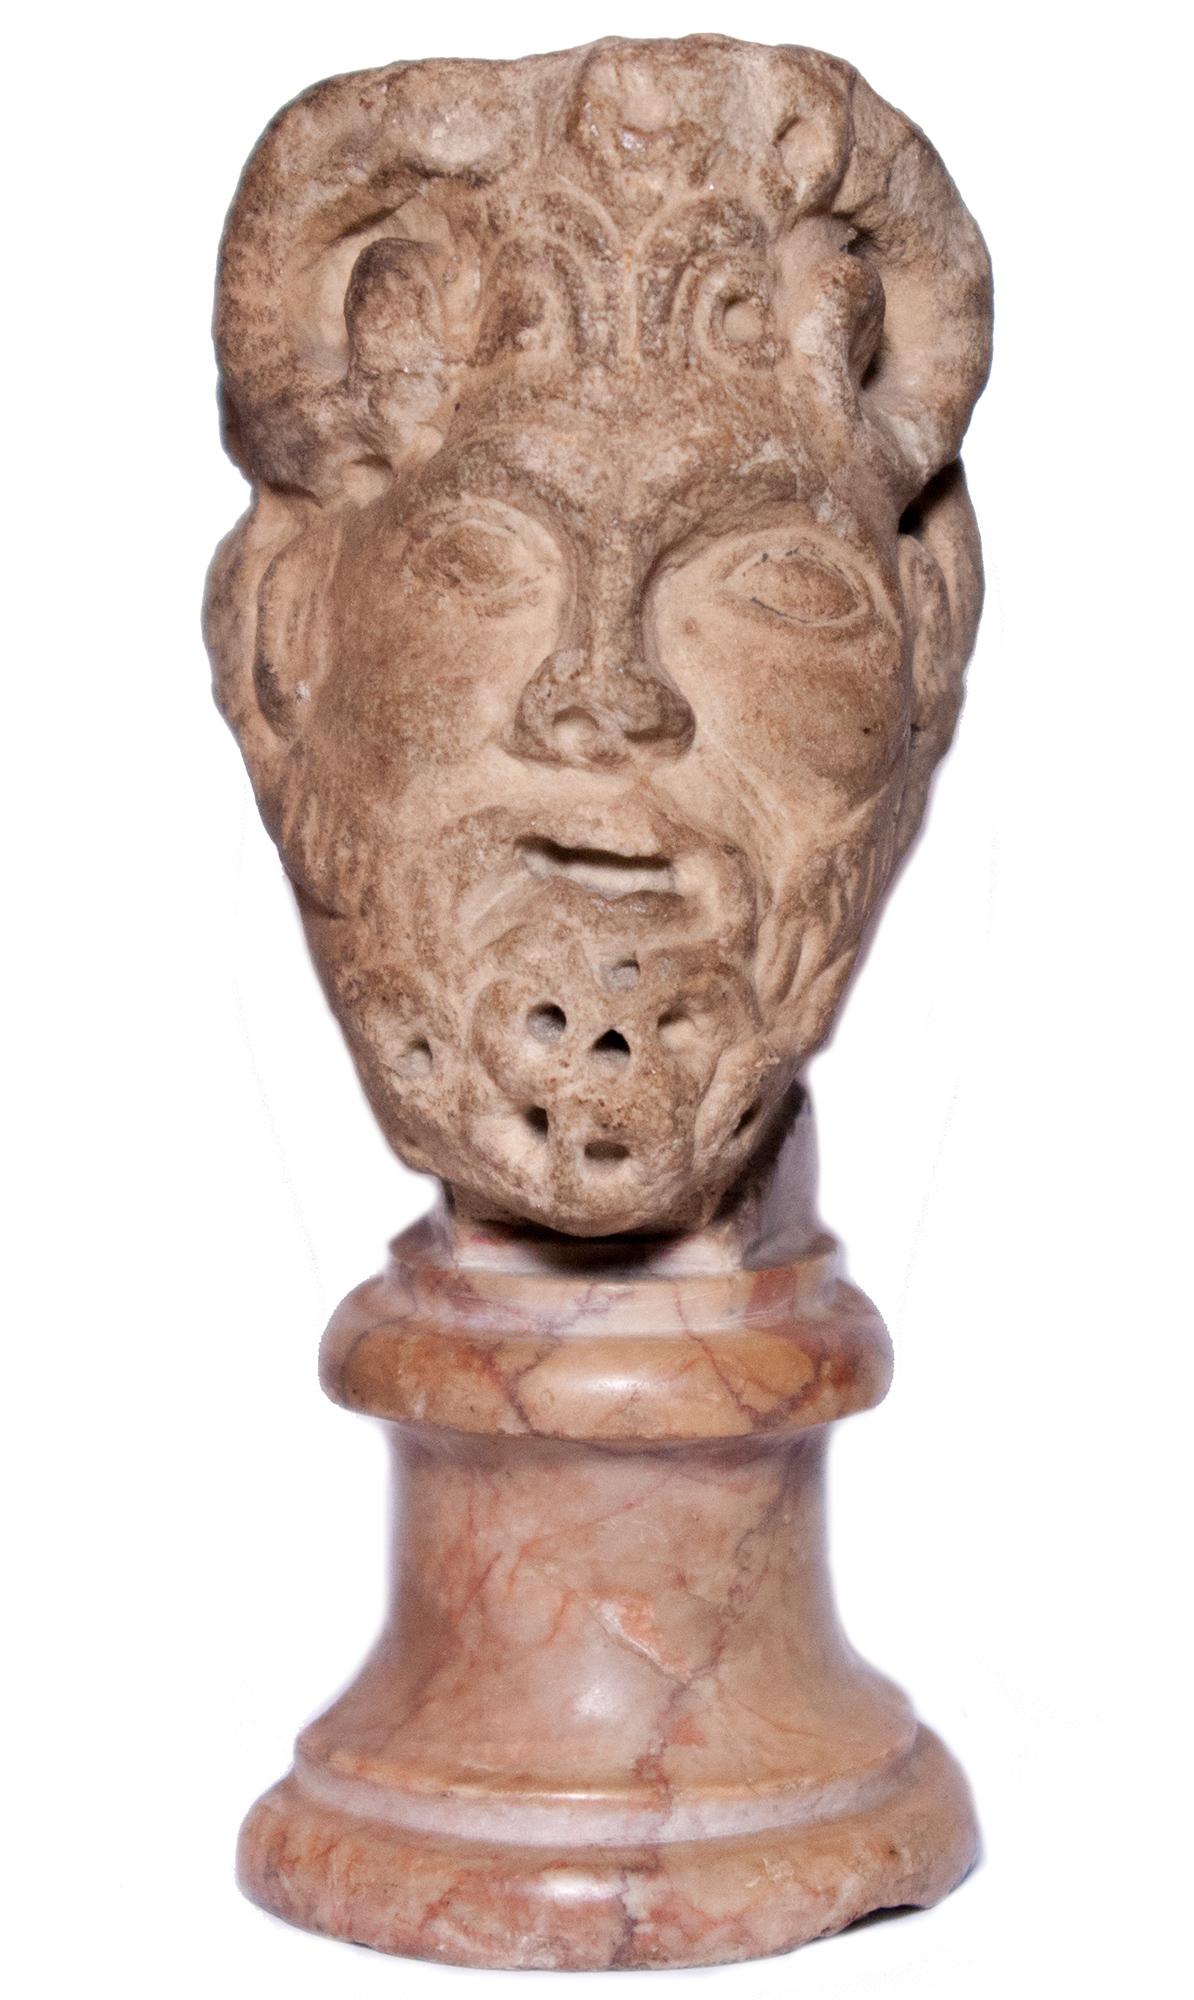 Unknown Figurative Sculpture - Janiform marble head, Italy, 12th-13th century